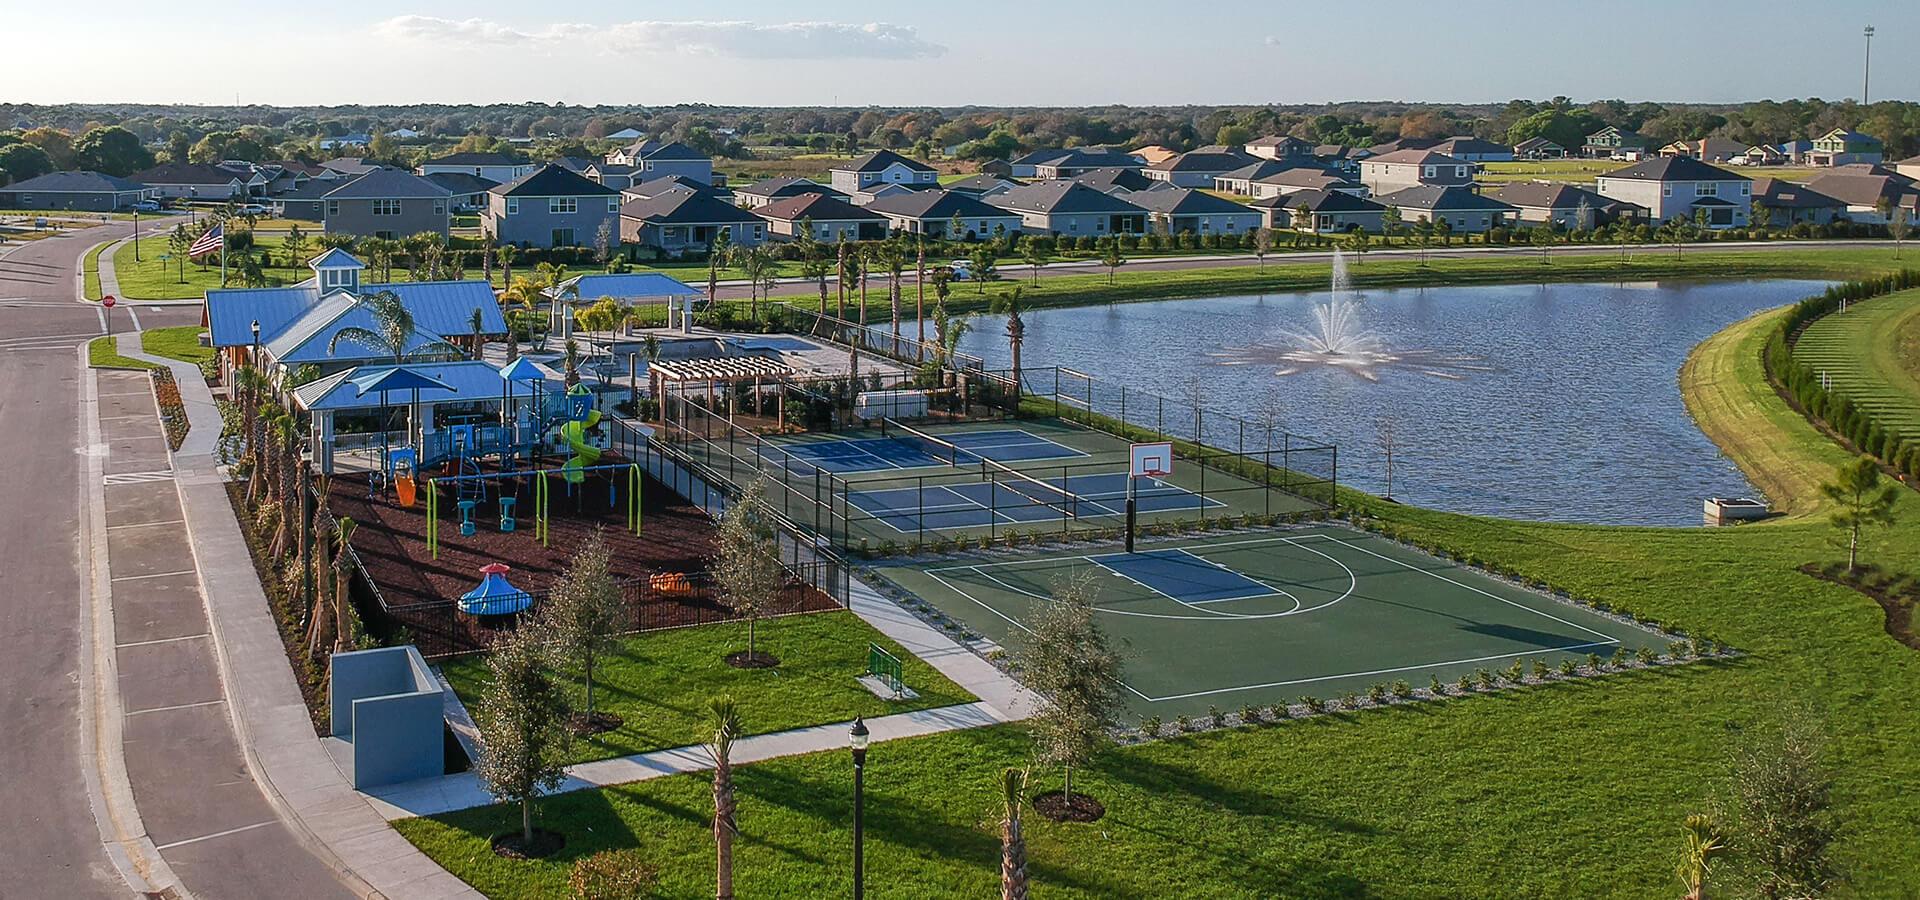 Lakefront amenity center in Parrish Fl